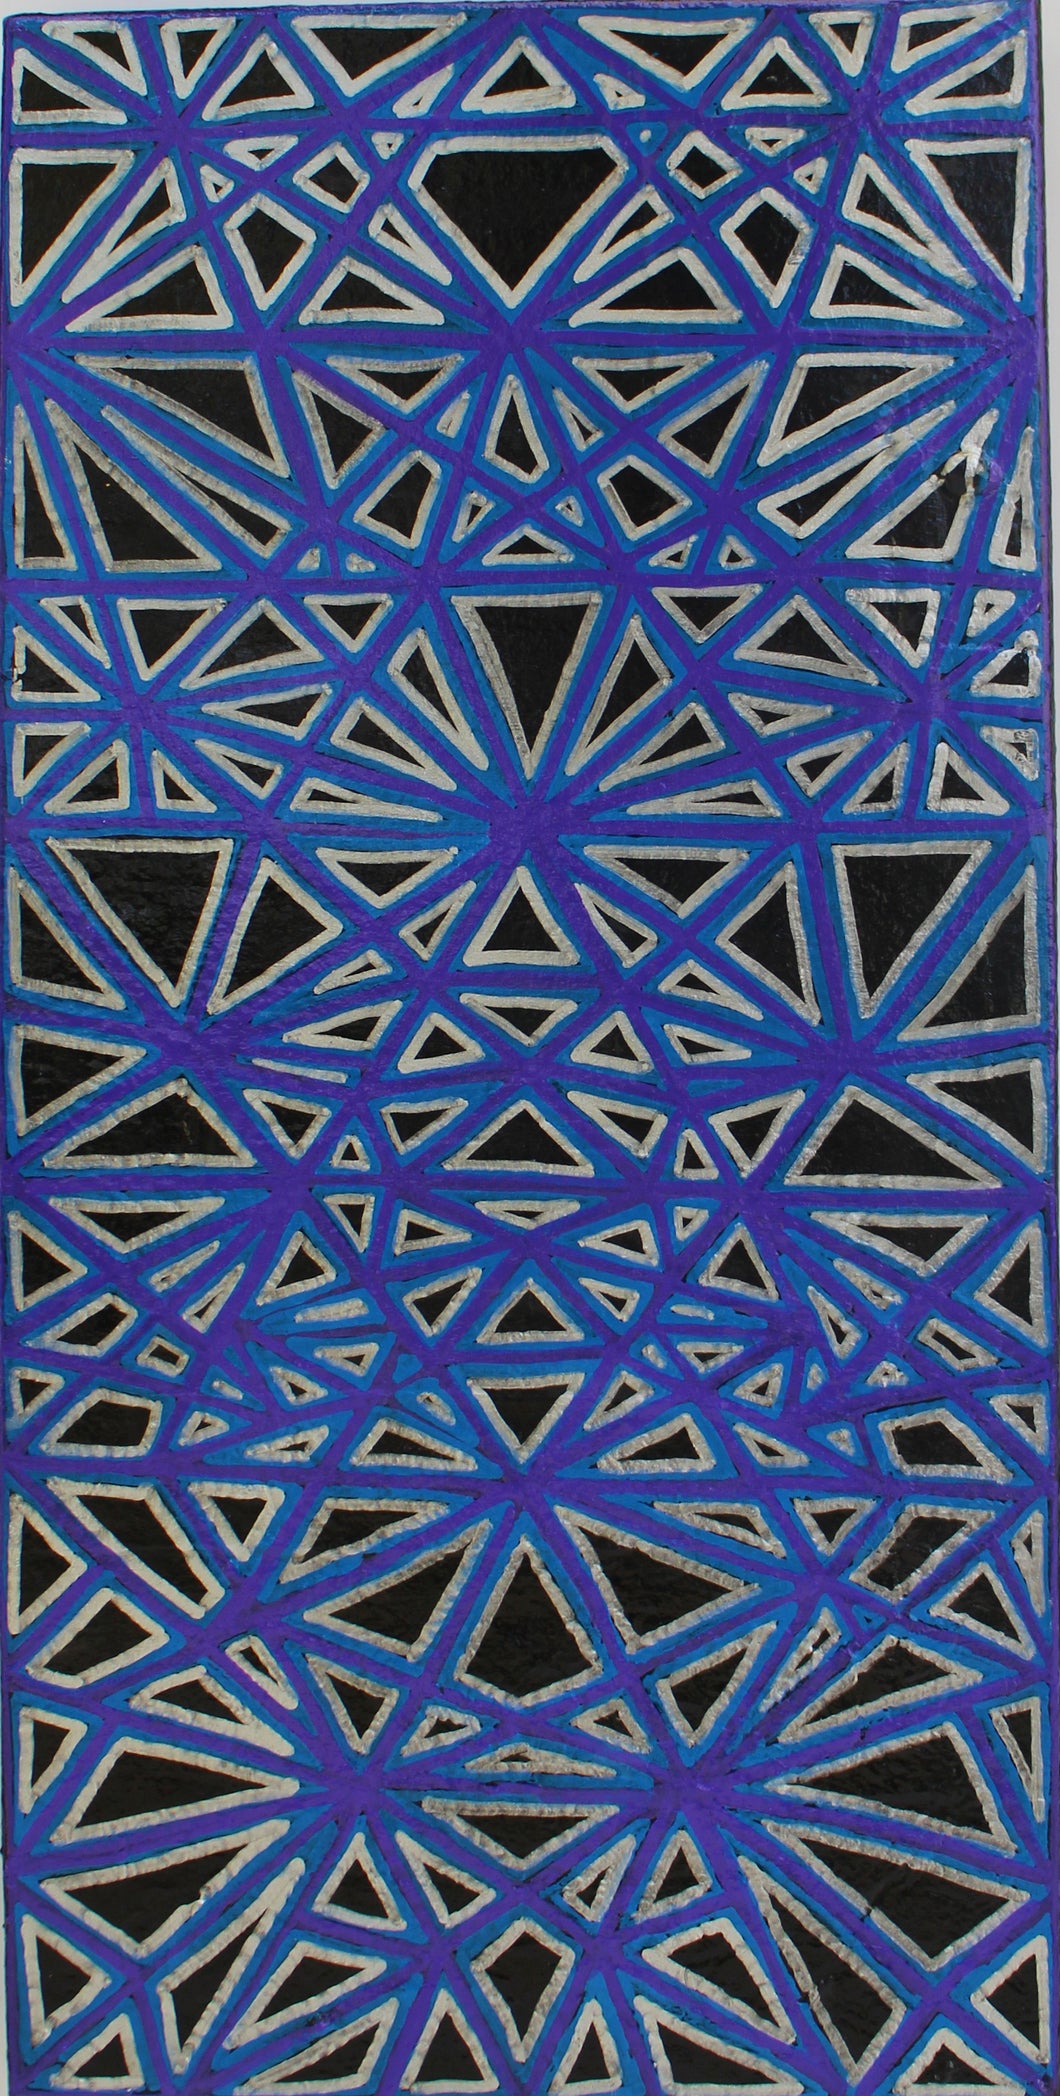 Blue and Purple Hand Painted Geometric Design Painting